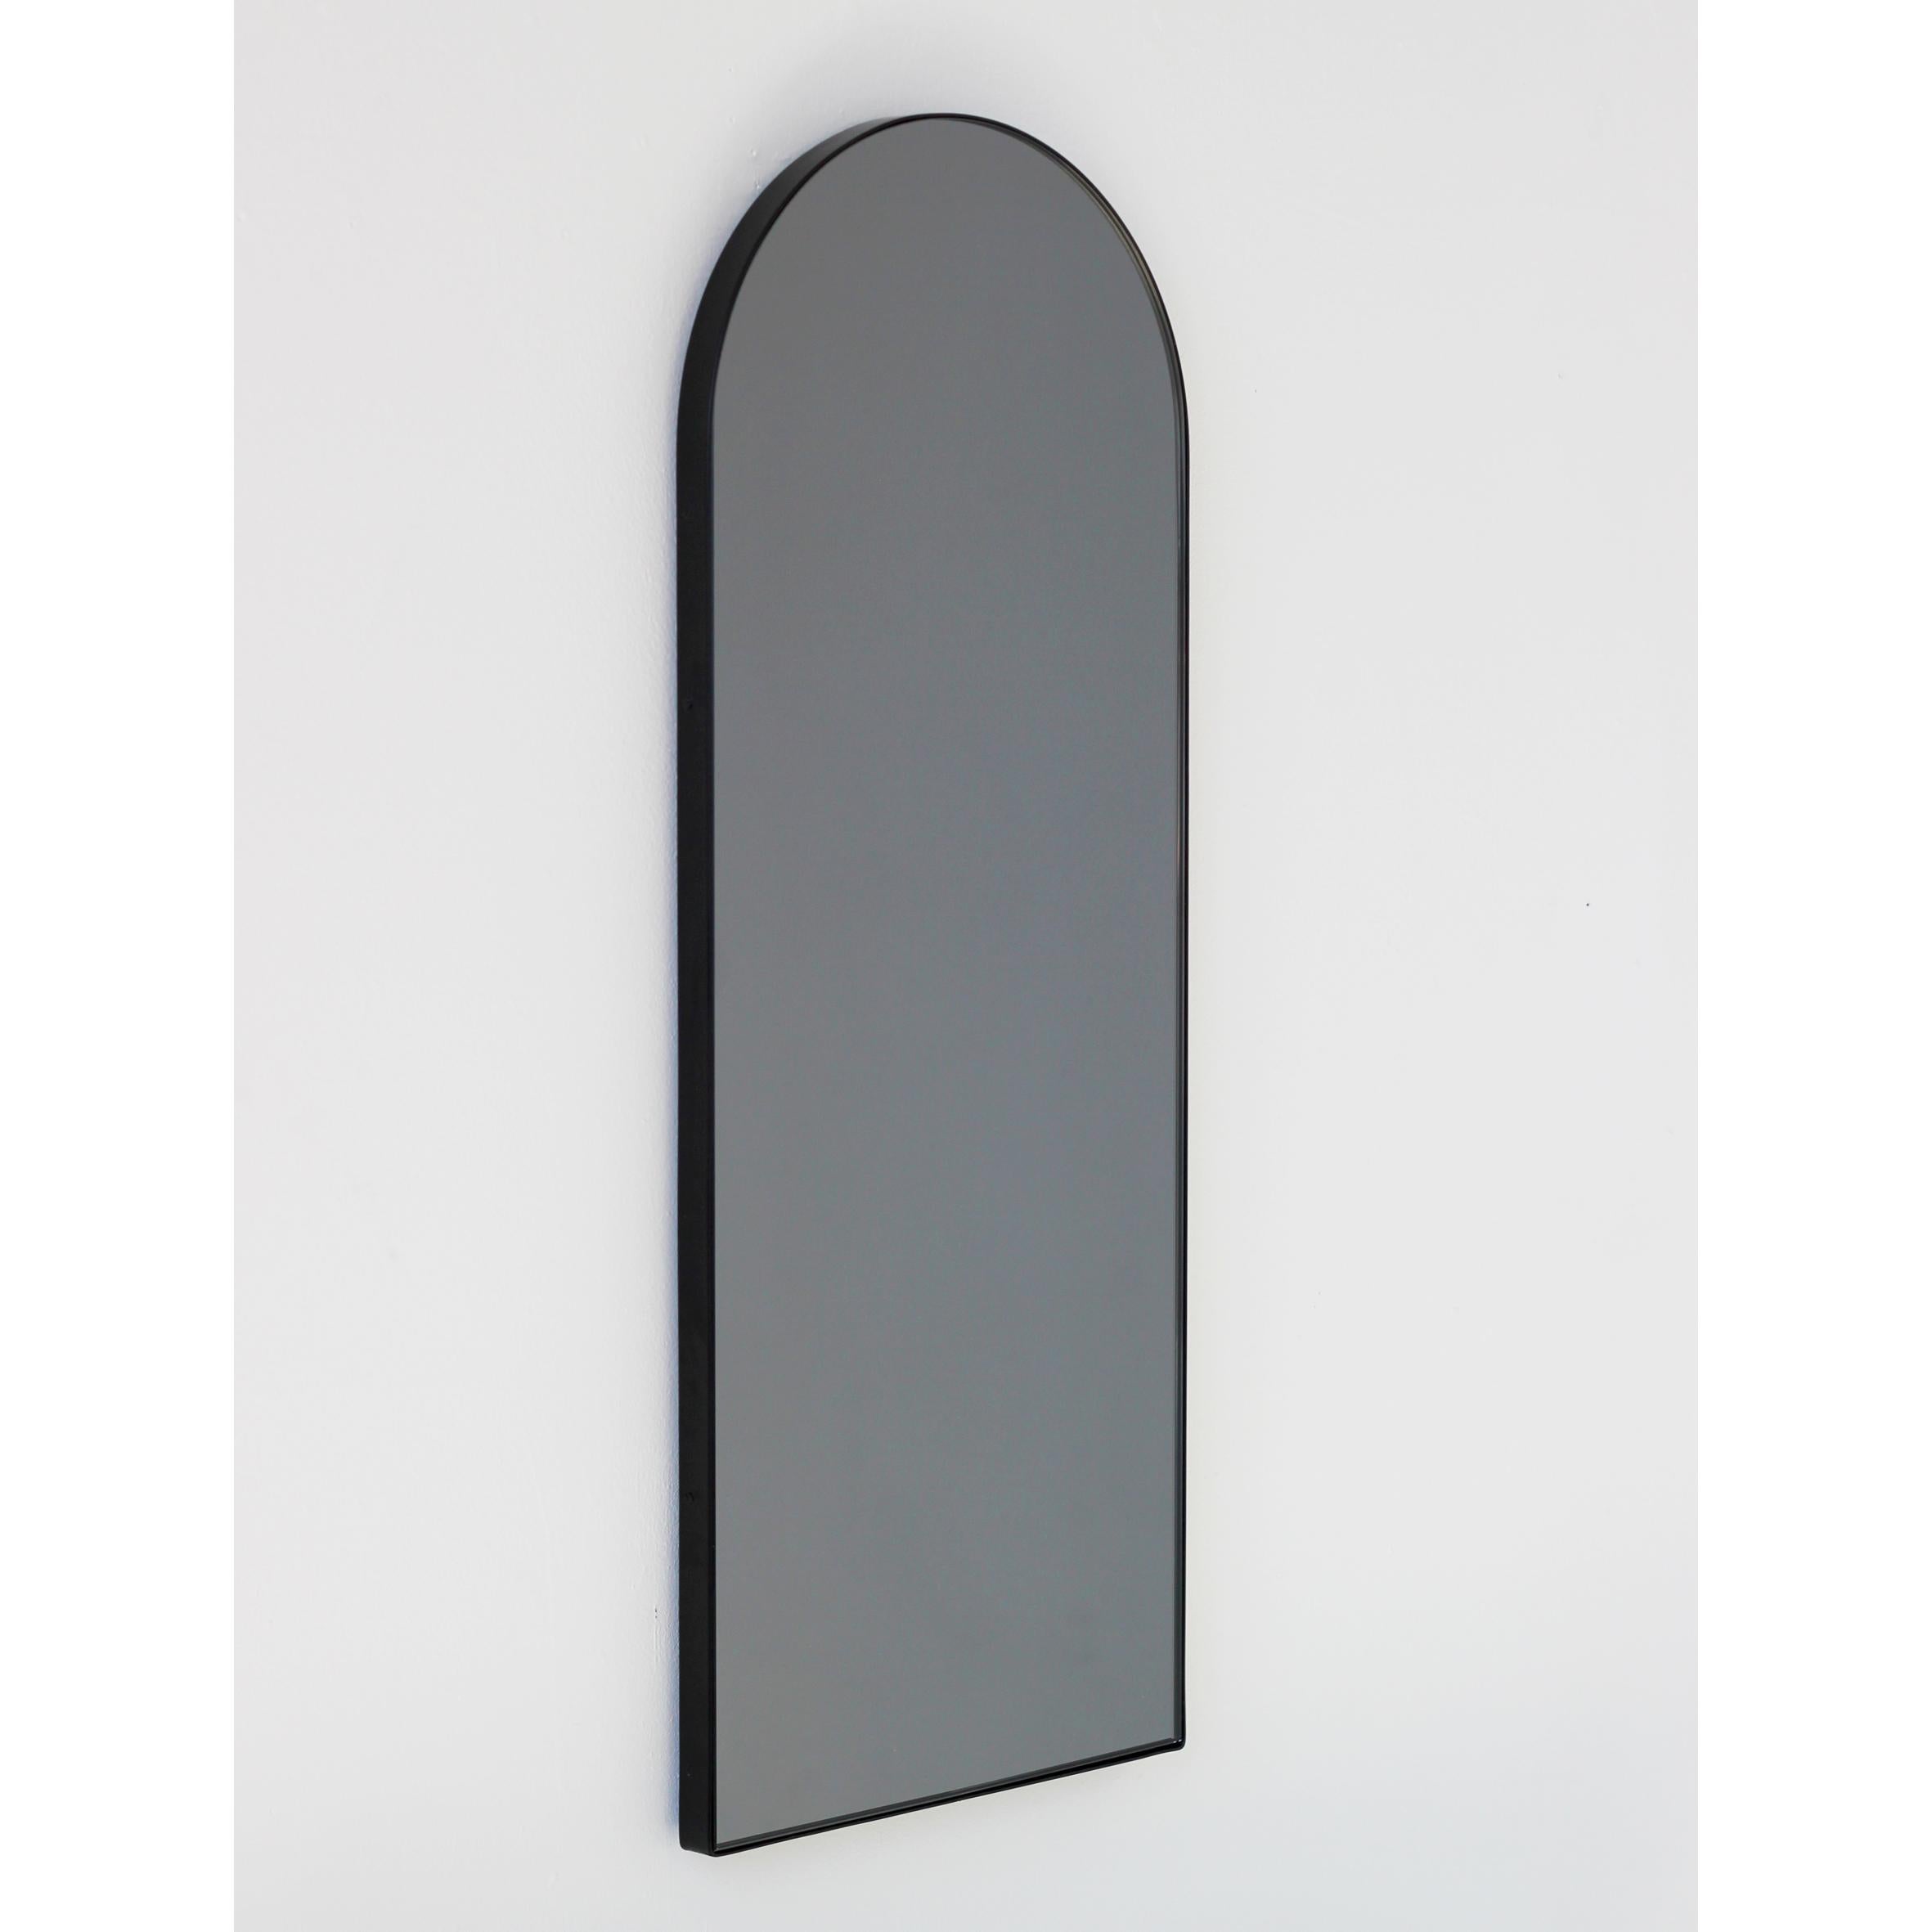 Contemporary Arcus™ arch shaped black tinted mirror with an elegant black frame. Designed and handcrafted in London, UK.

Our mirrors are designed with an integrated French cleat (split batten) system that ensures the mirror is securely mounted